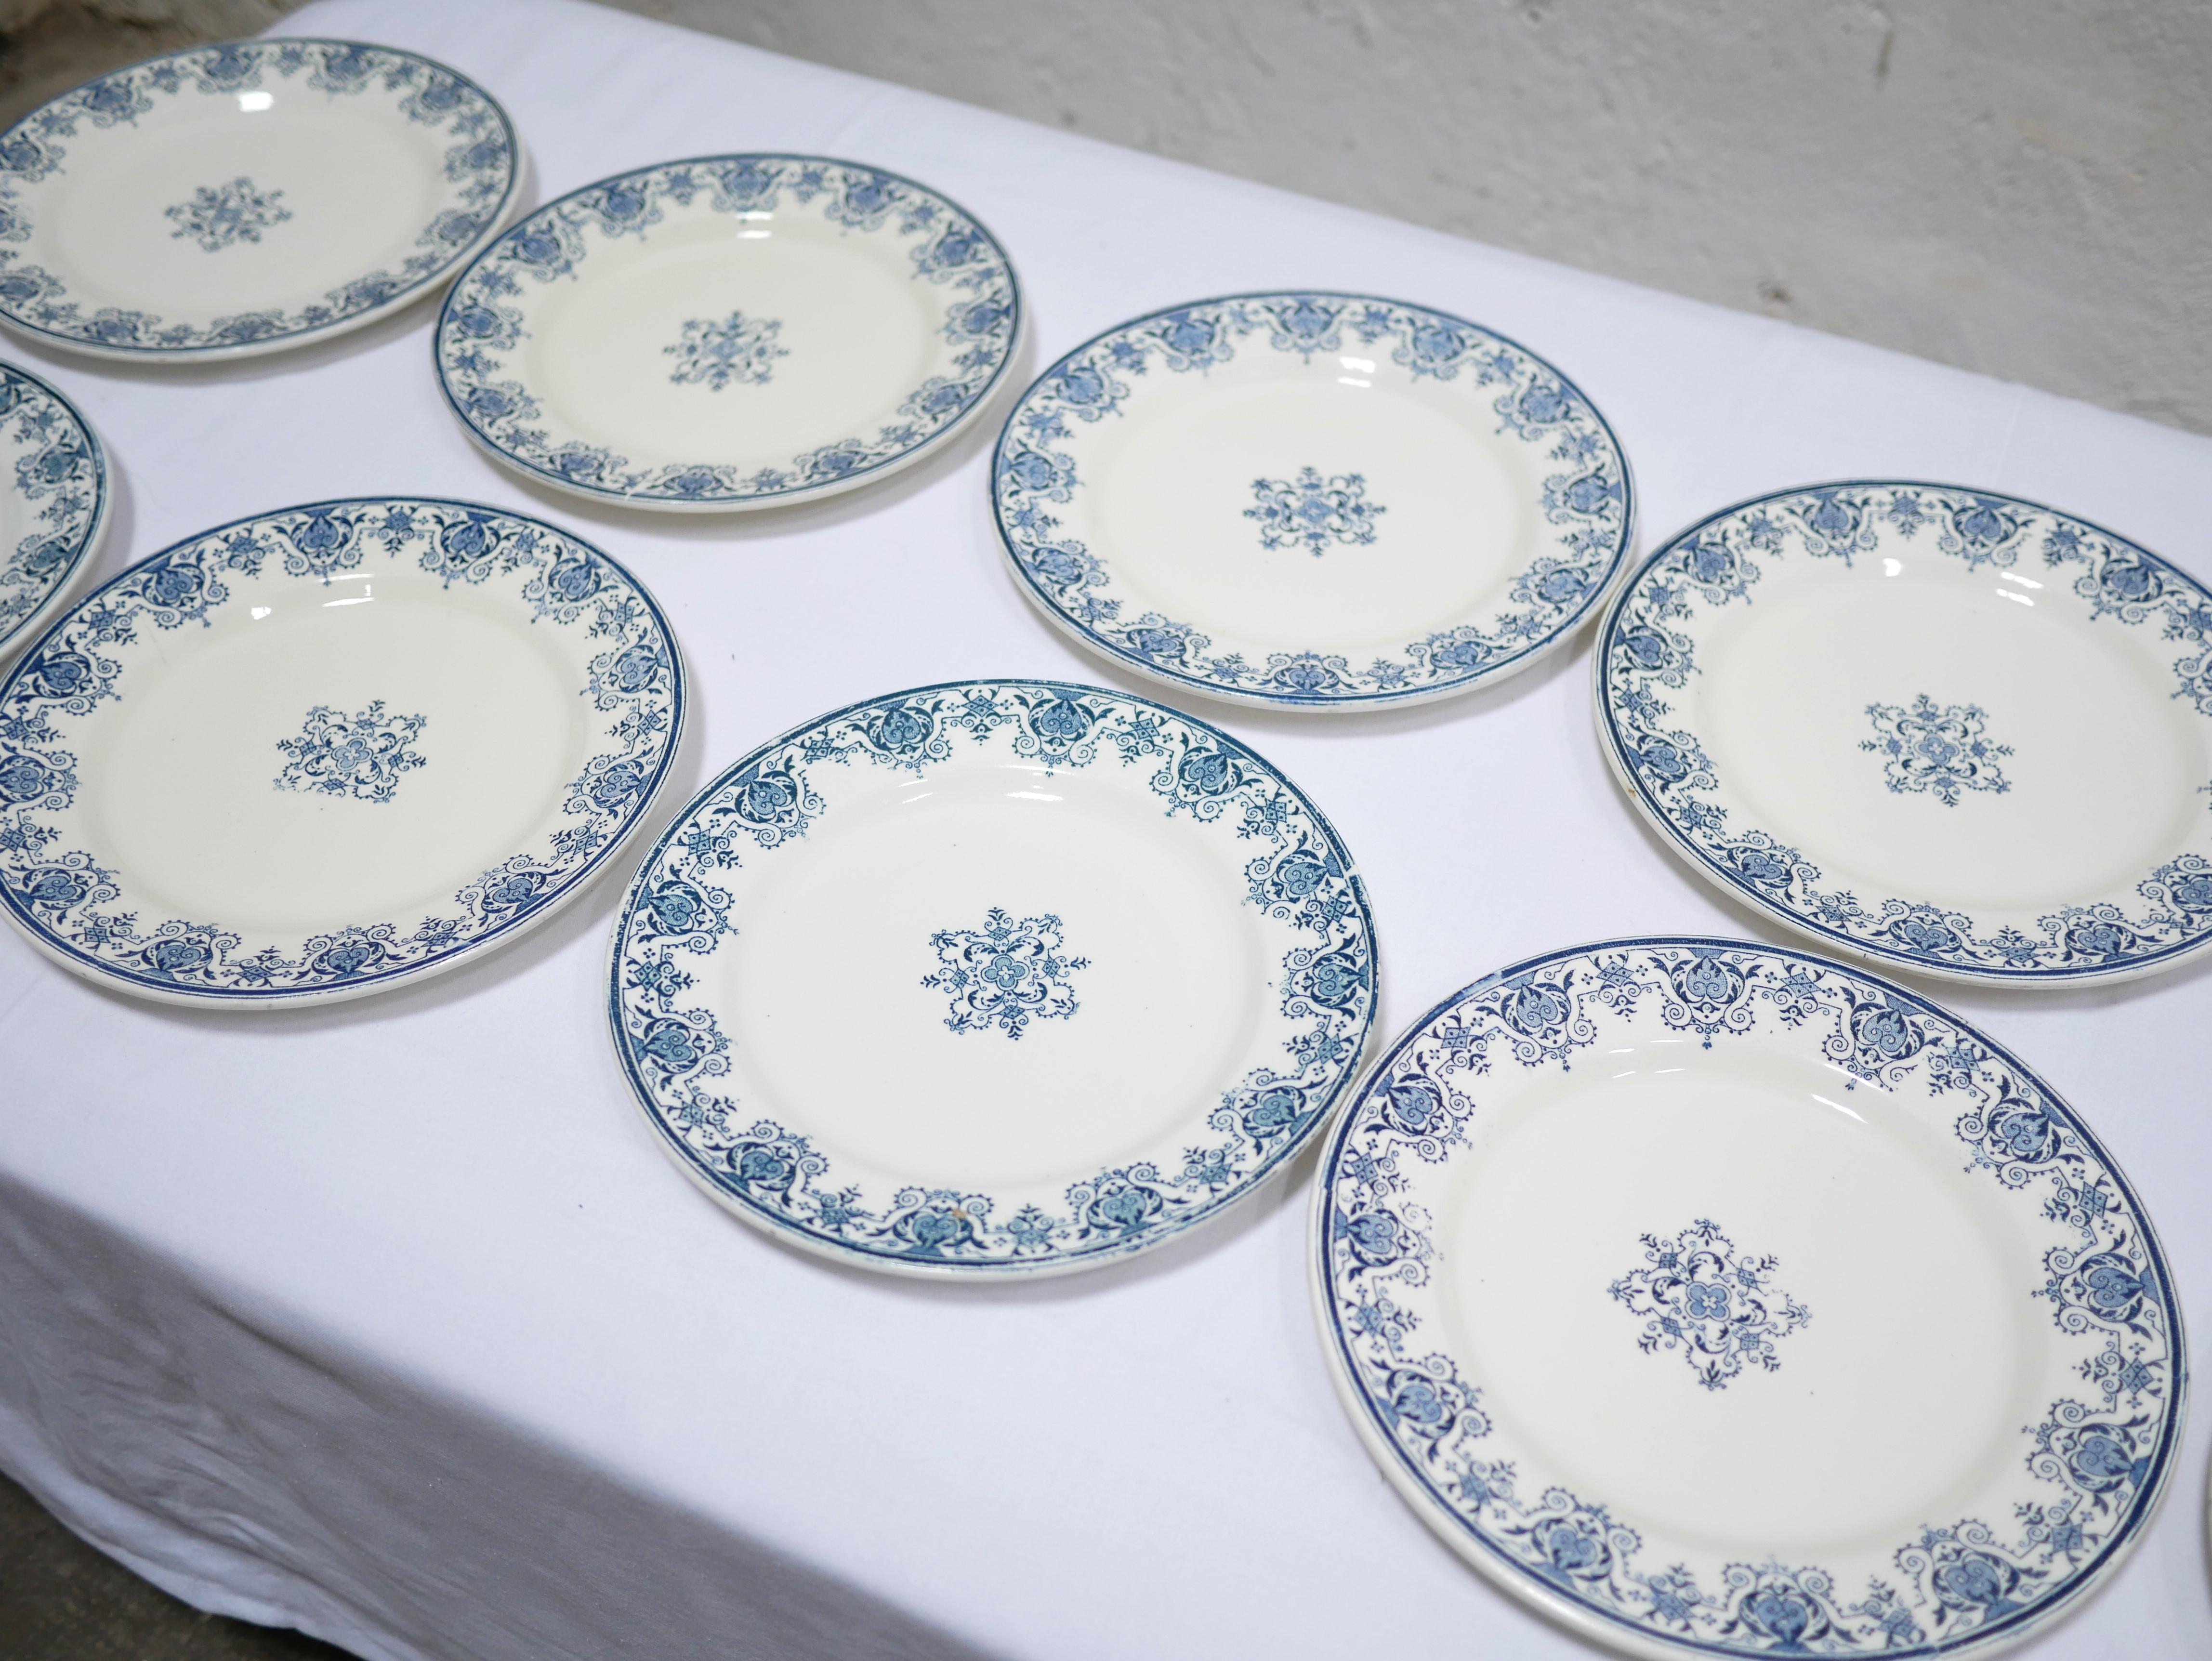 Series of 10 Old Terre De Fer Plates by L.G. for the Clairefontaine Earthenware For Sale 3